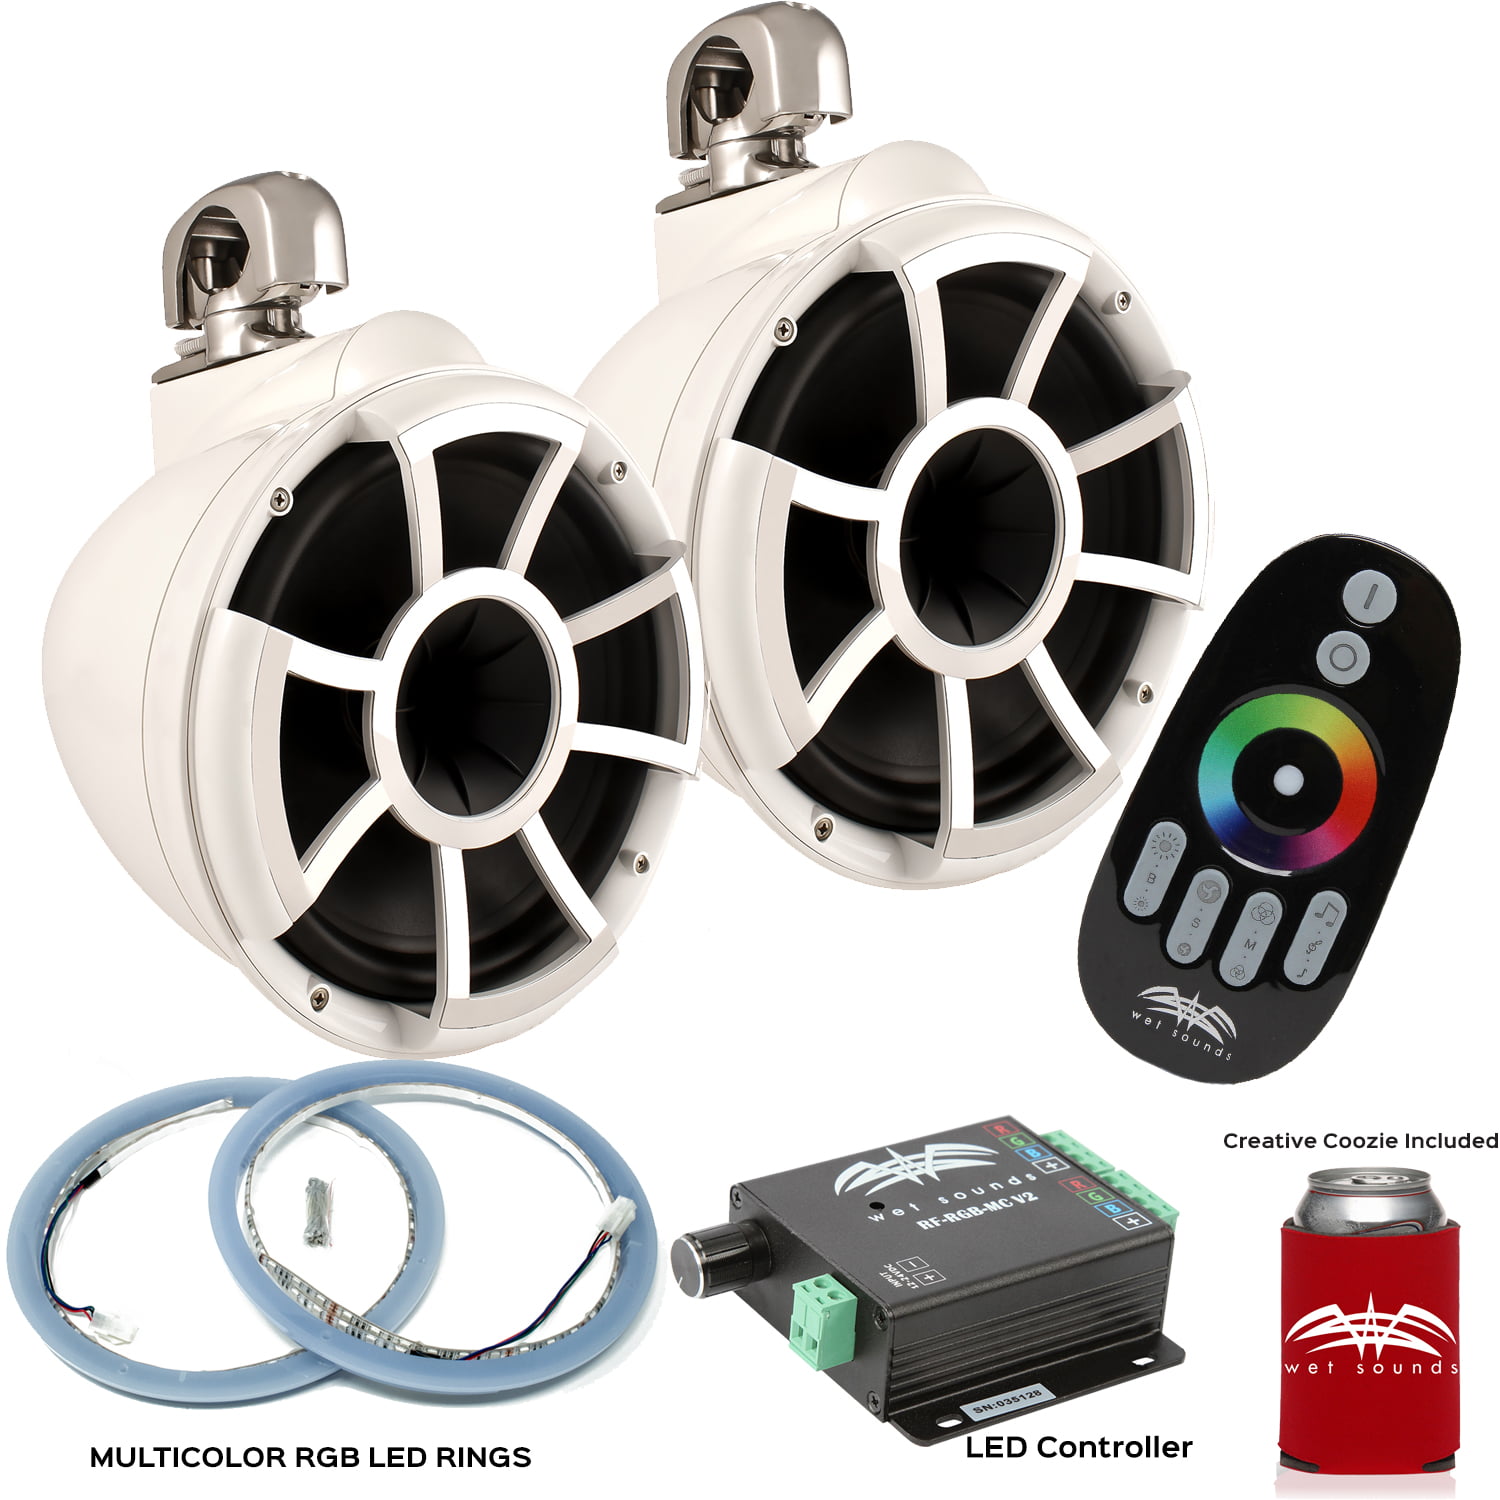 Wet Sounds REV10W-SC Swivel Clamp Tower Speakers with RGB LED Speaker Rings  & LED Controller - White 